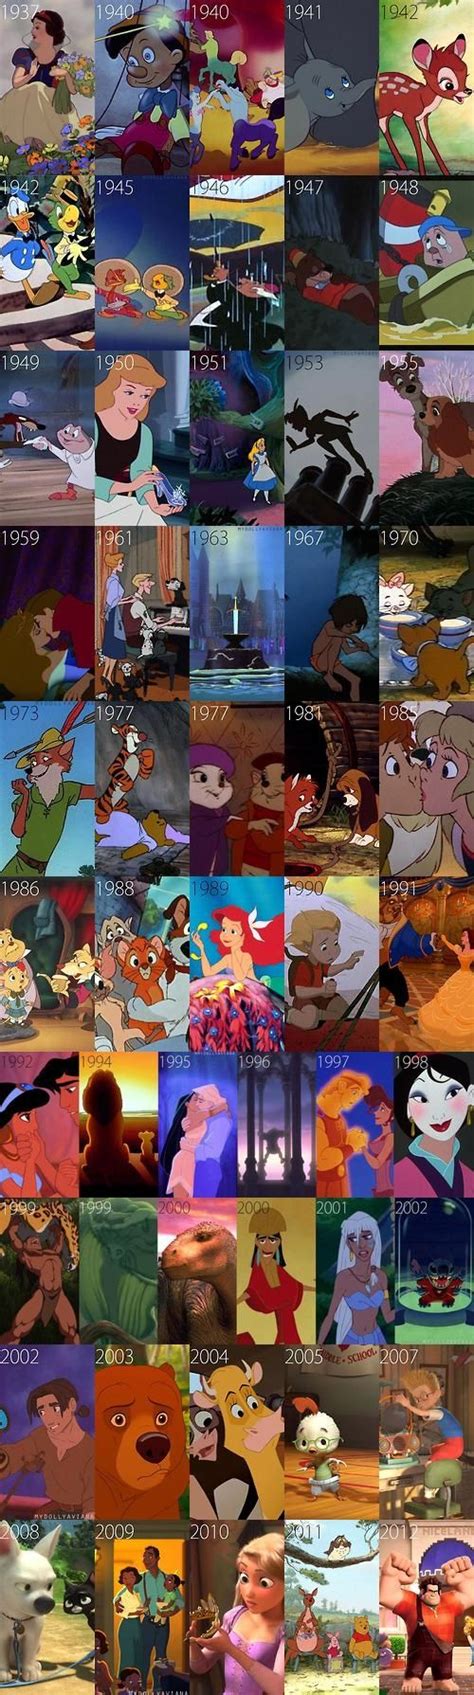 walt disney animated movies in chronological order technology now